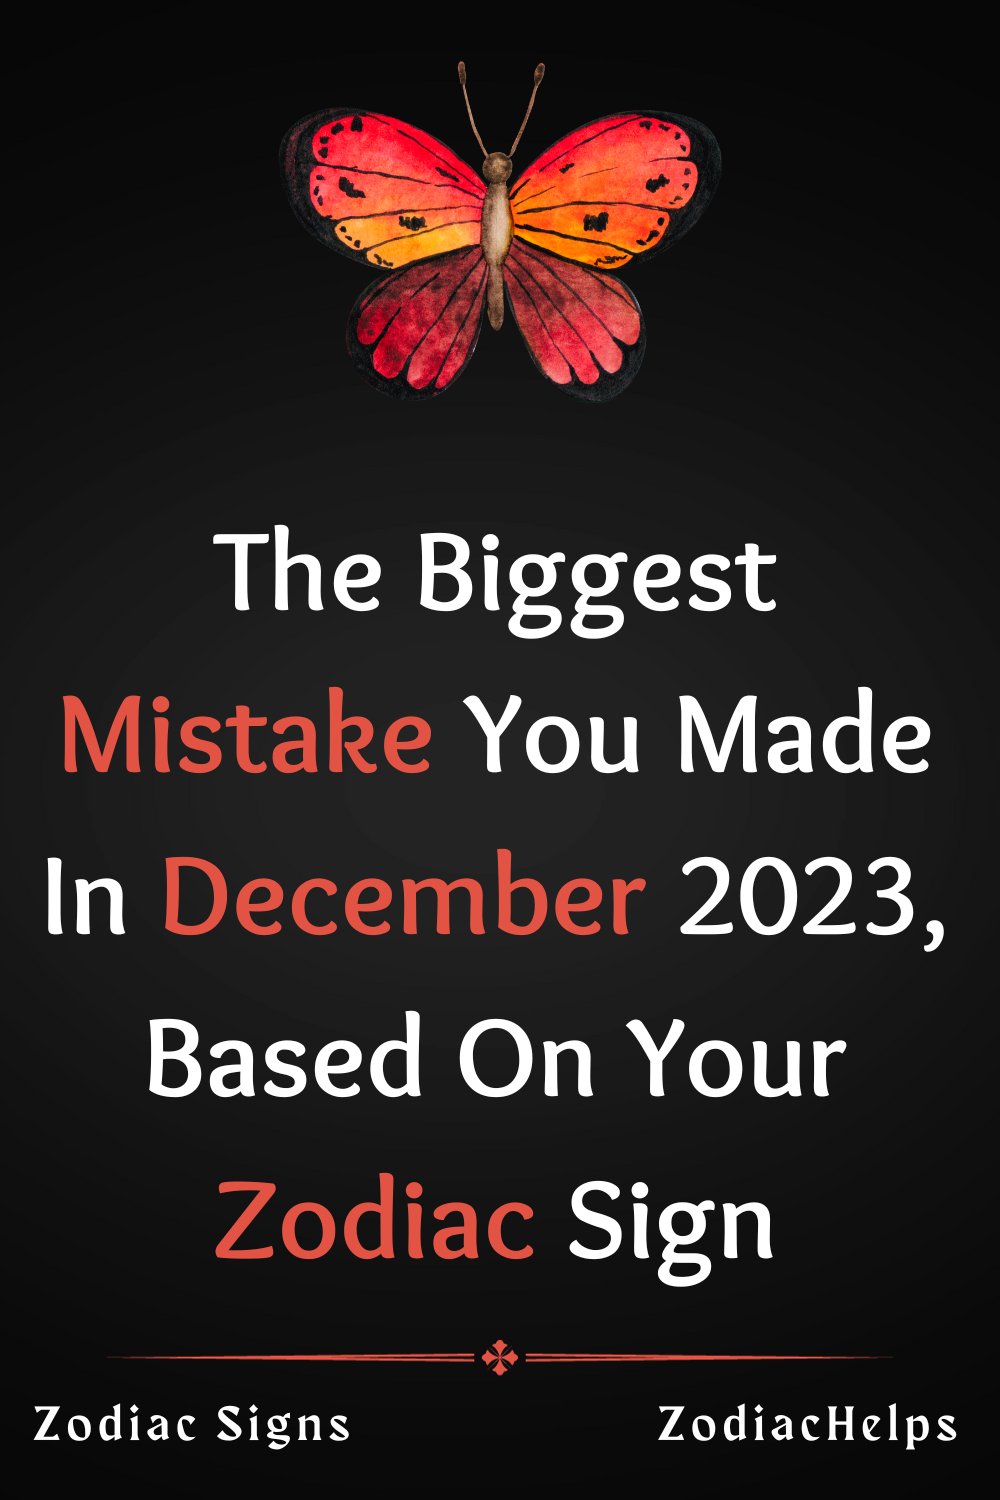 The Biggest Mistake You Made In December 2023, Based On Your Zodiac Sign